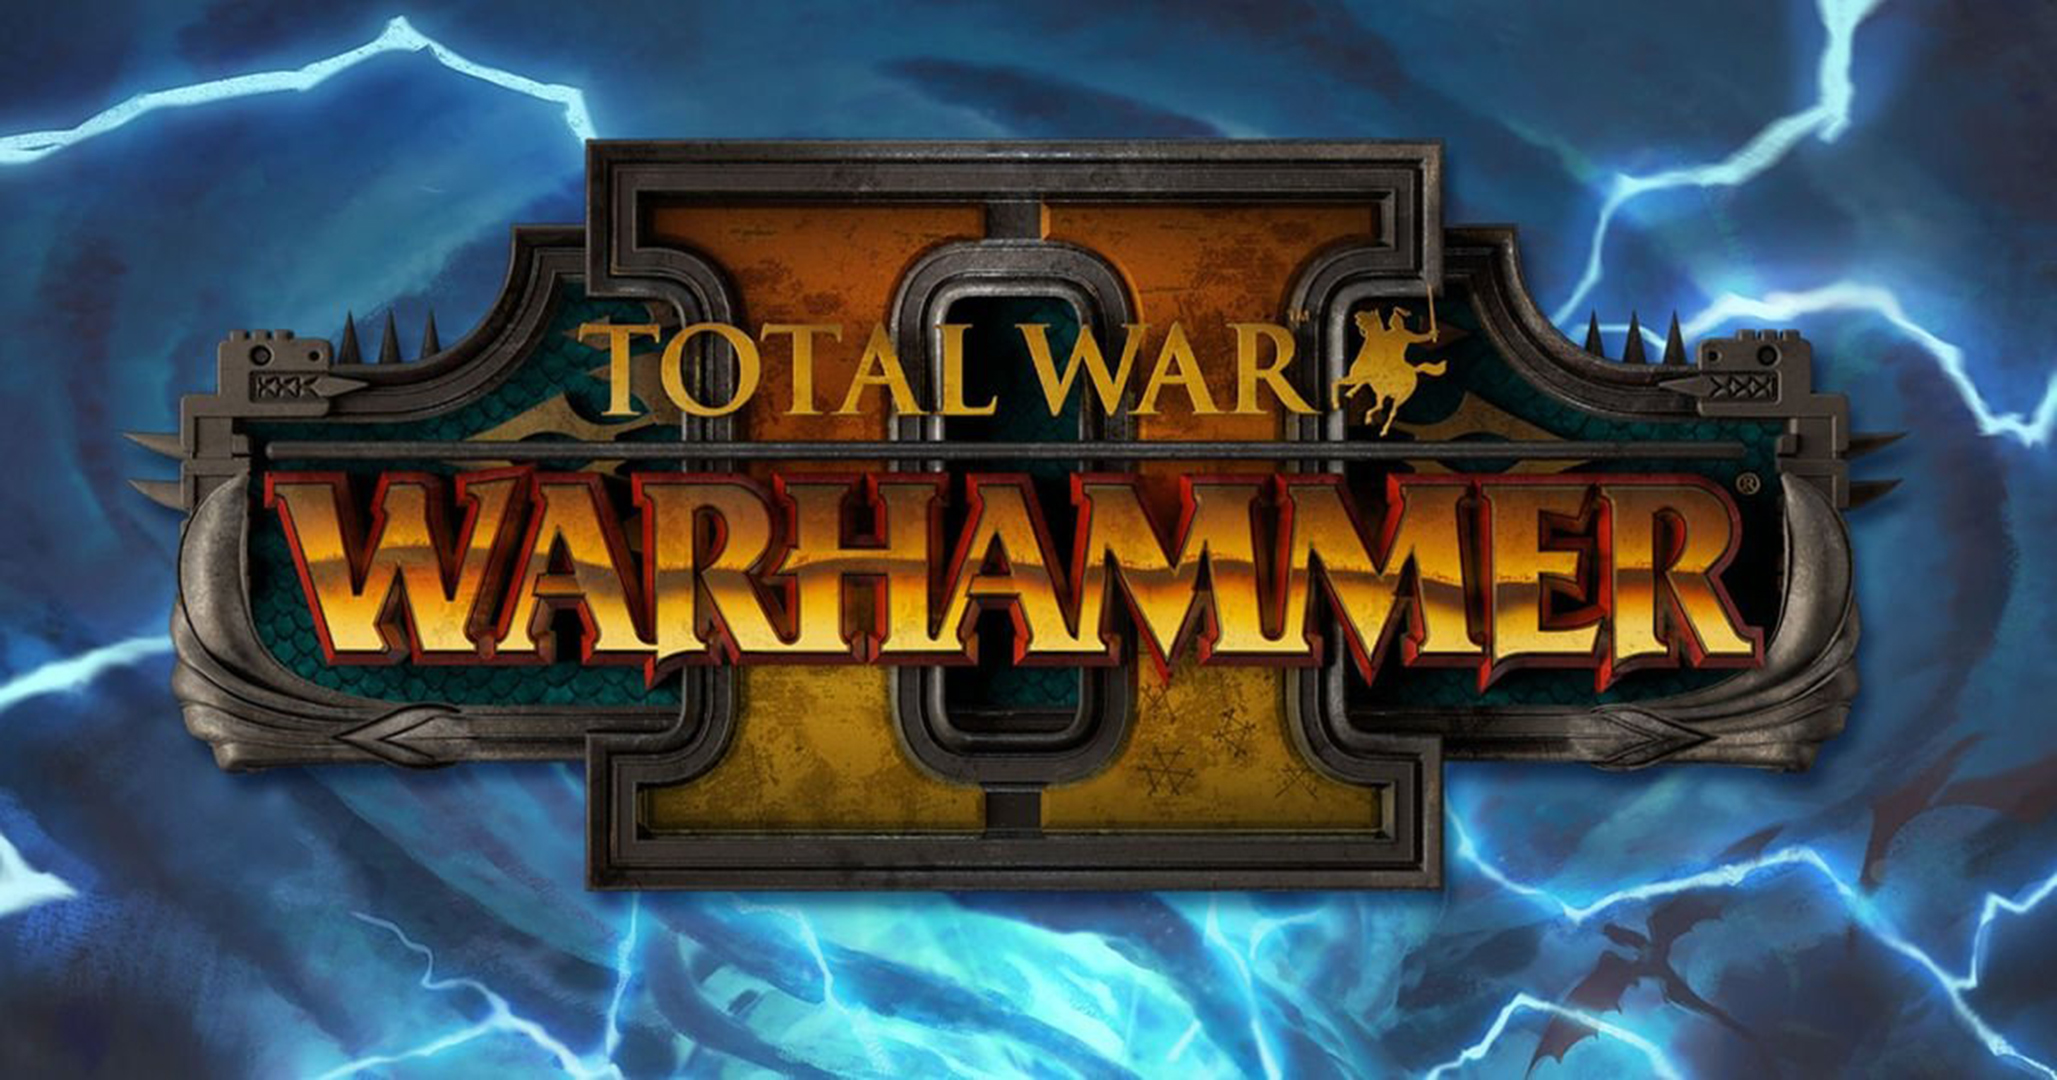 console commands for total war warhammer 2